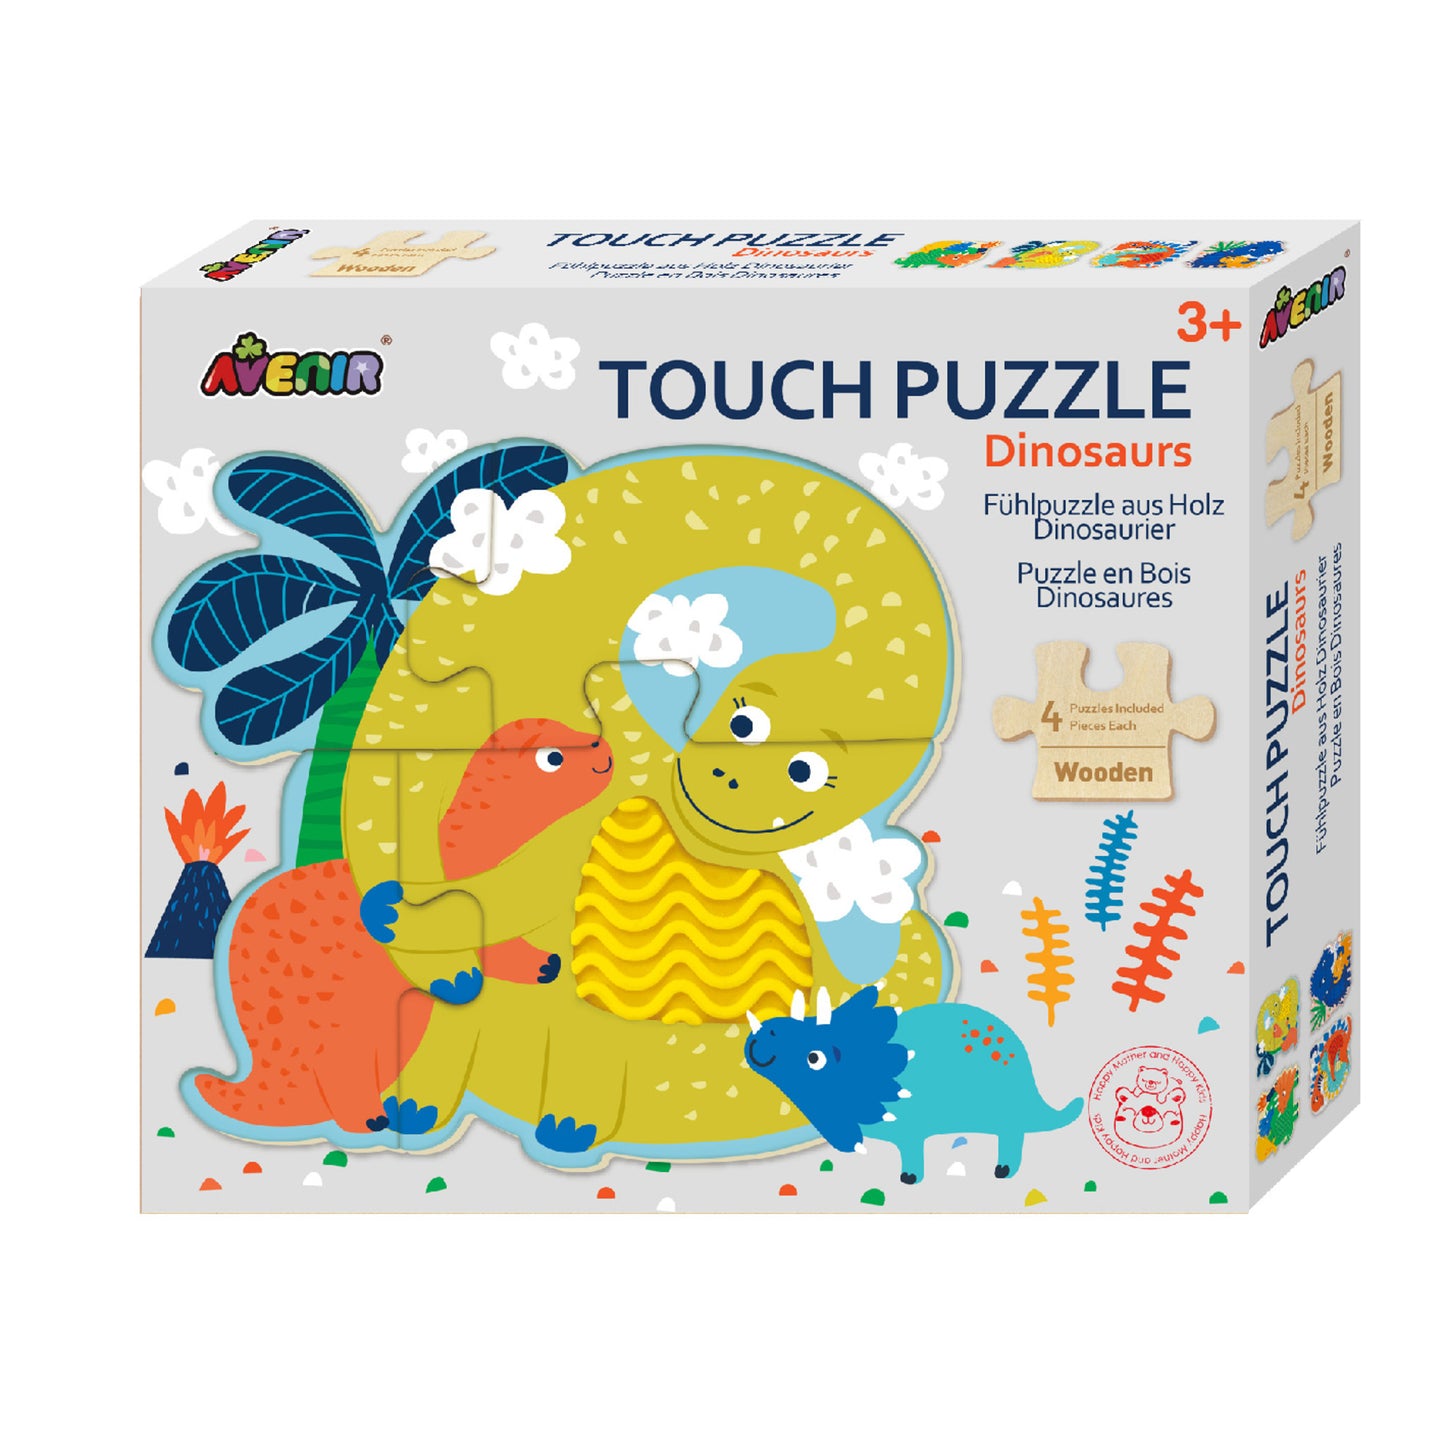 Wooden Touch Puzzle Dinosaurs